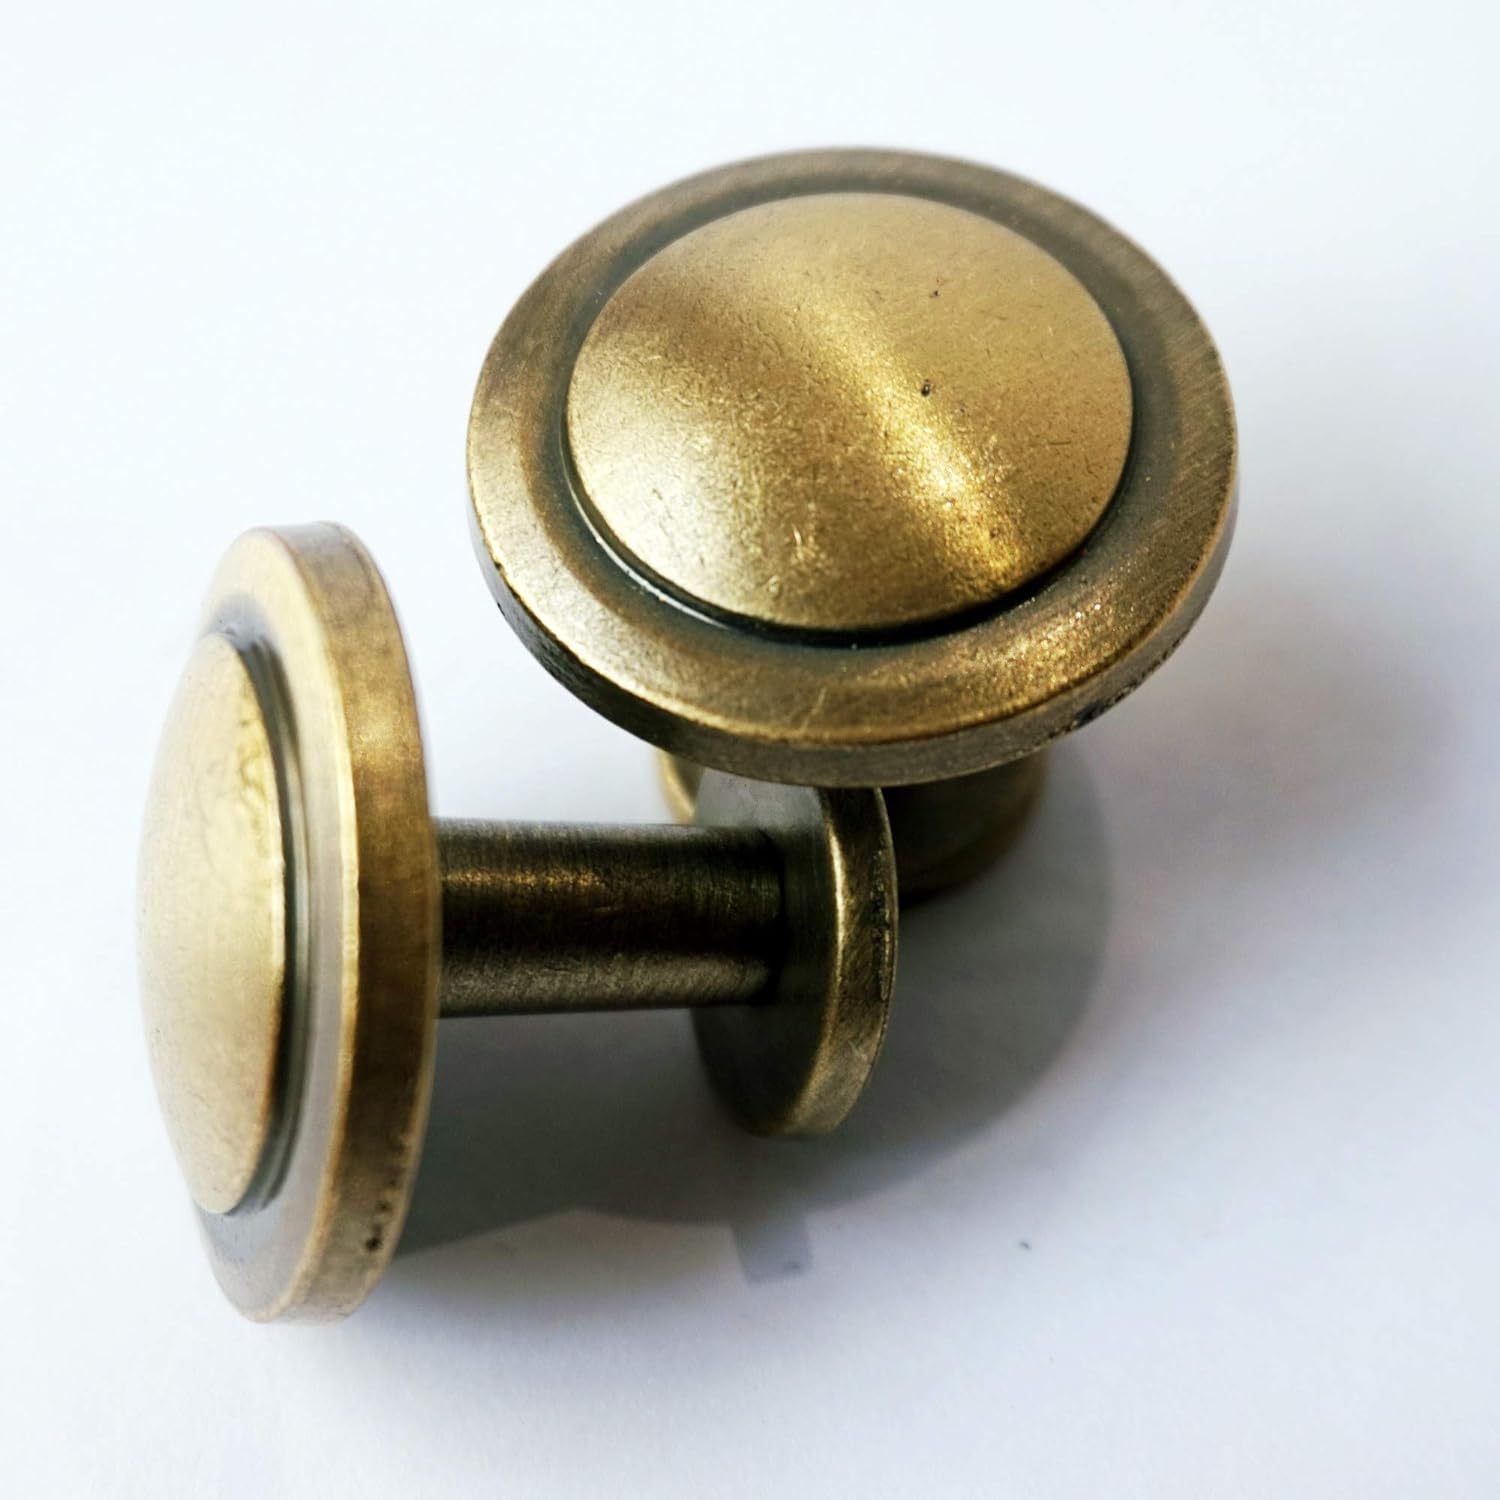 Tiazza 4pcs Round Solid Brass Knobs Antique Cabinet Drawer